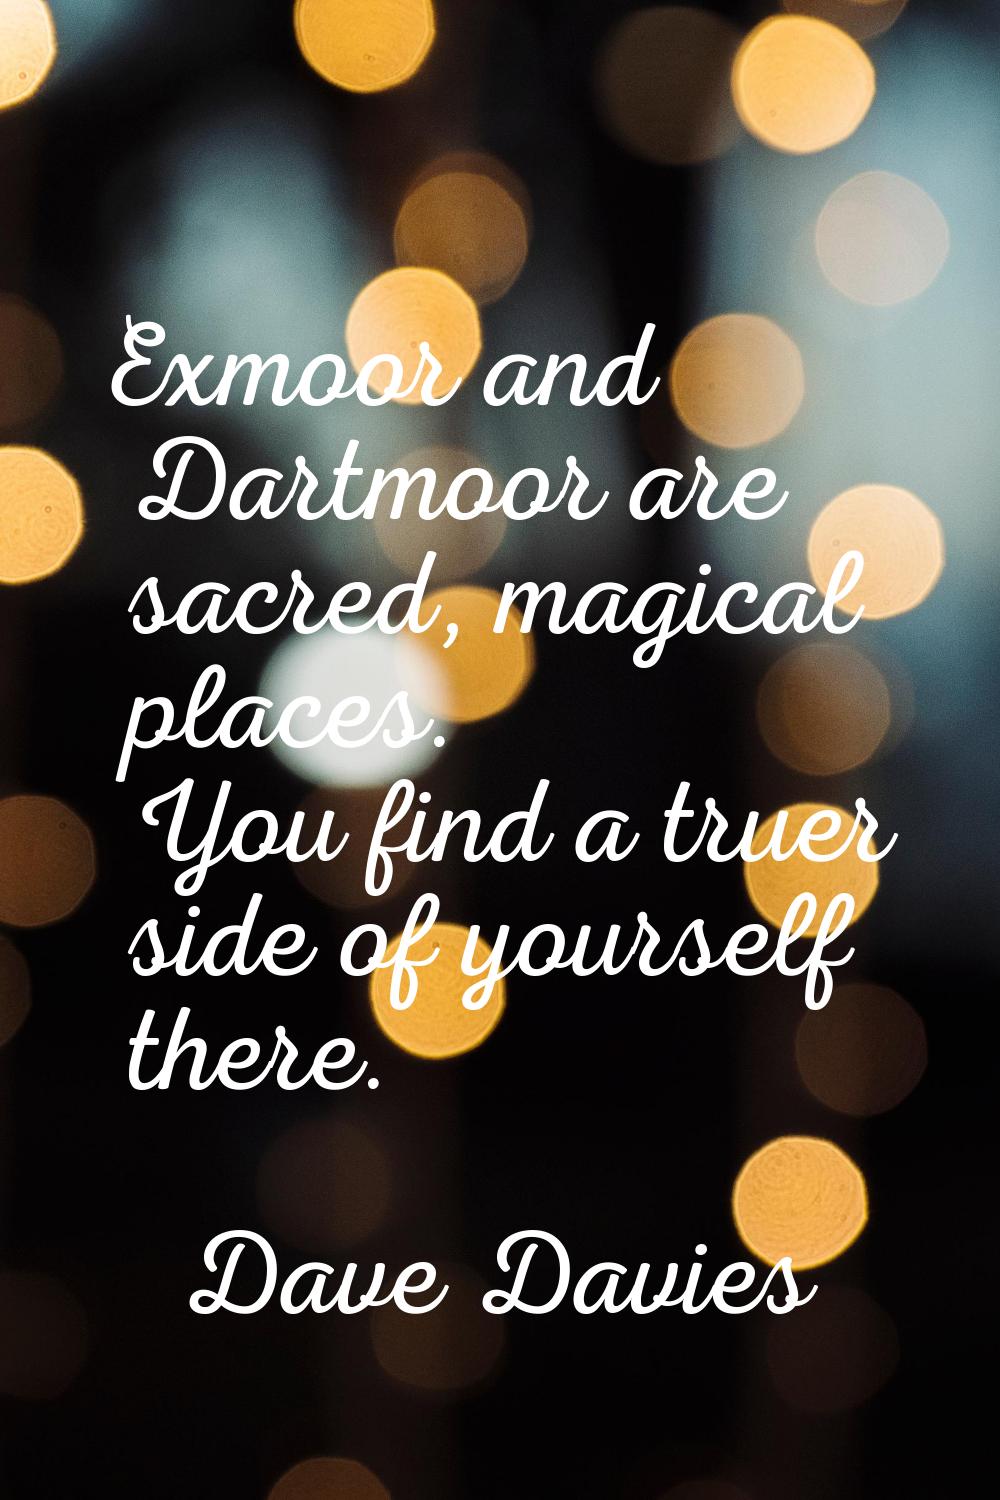 Exmoor and Dartmoor are sacred, magical places. You find a truer side of yourself there.